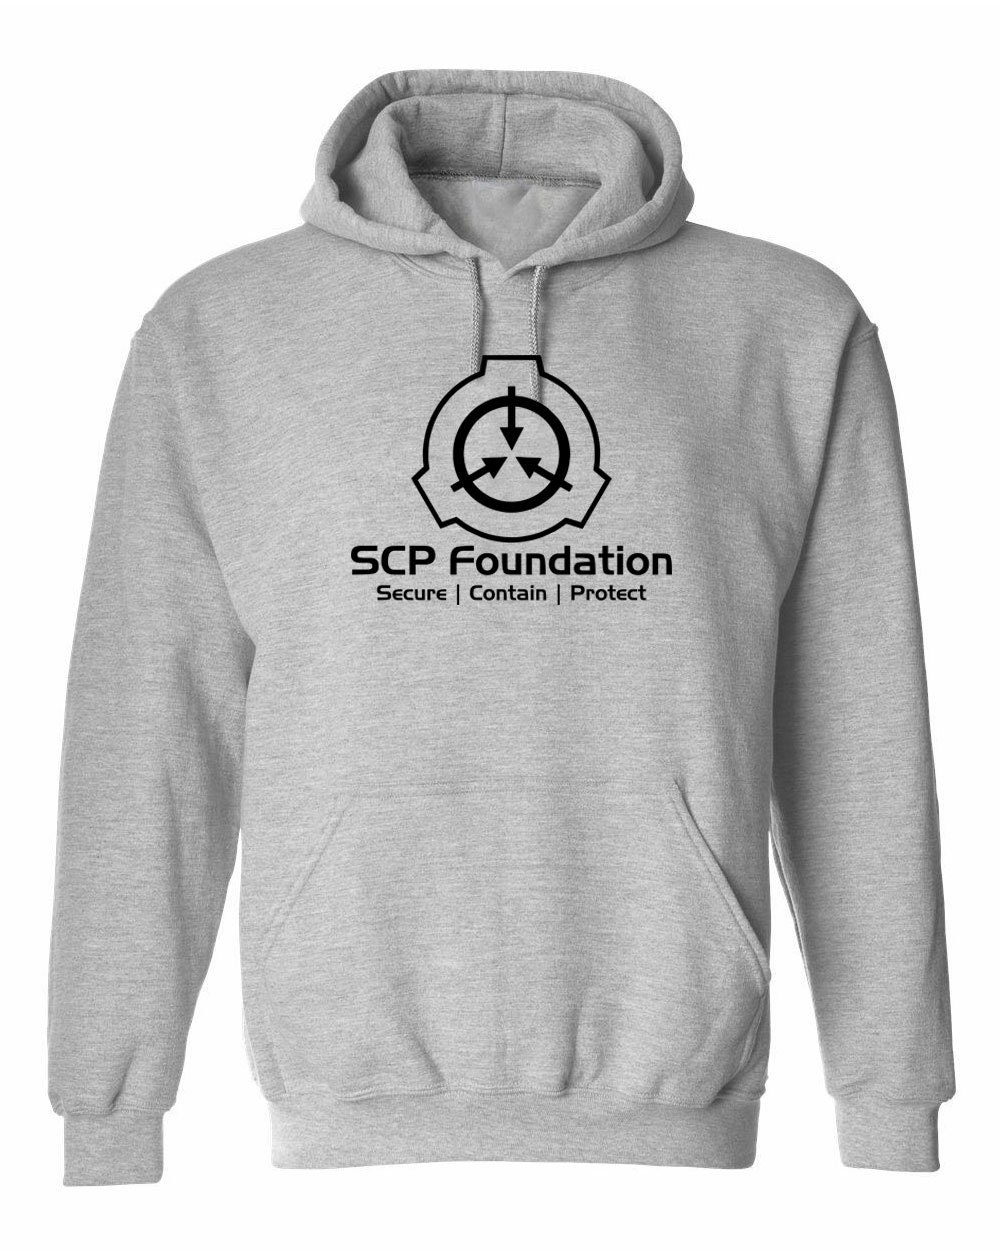 Design SCP Foundation Secure Contain Protect Fictional -  Denmark